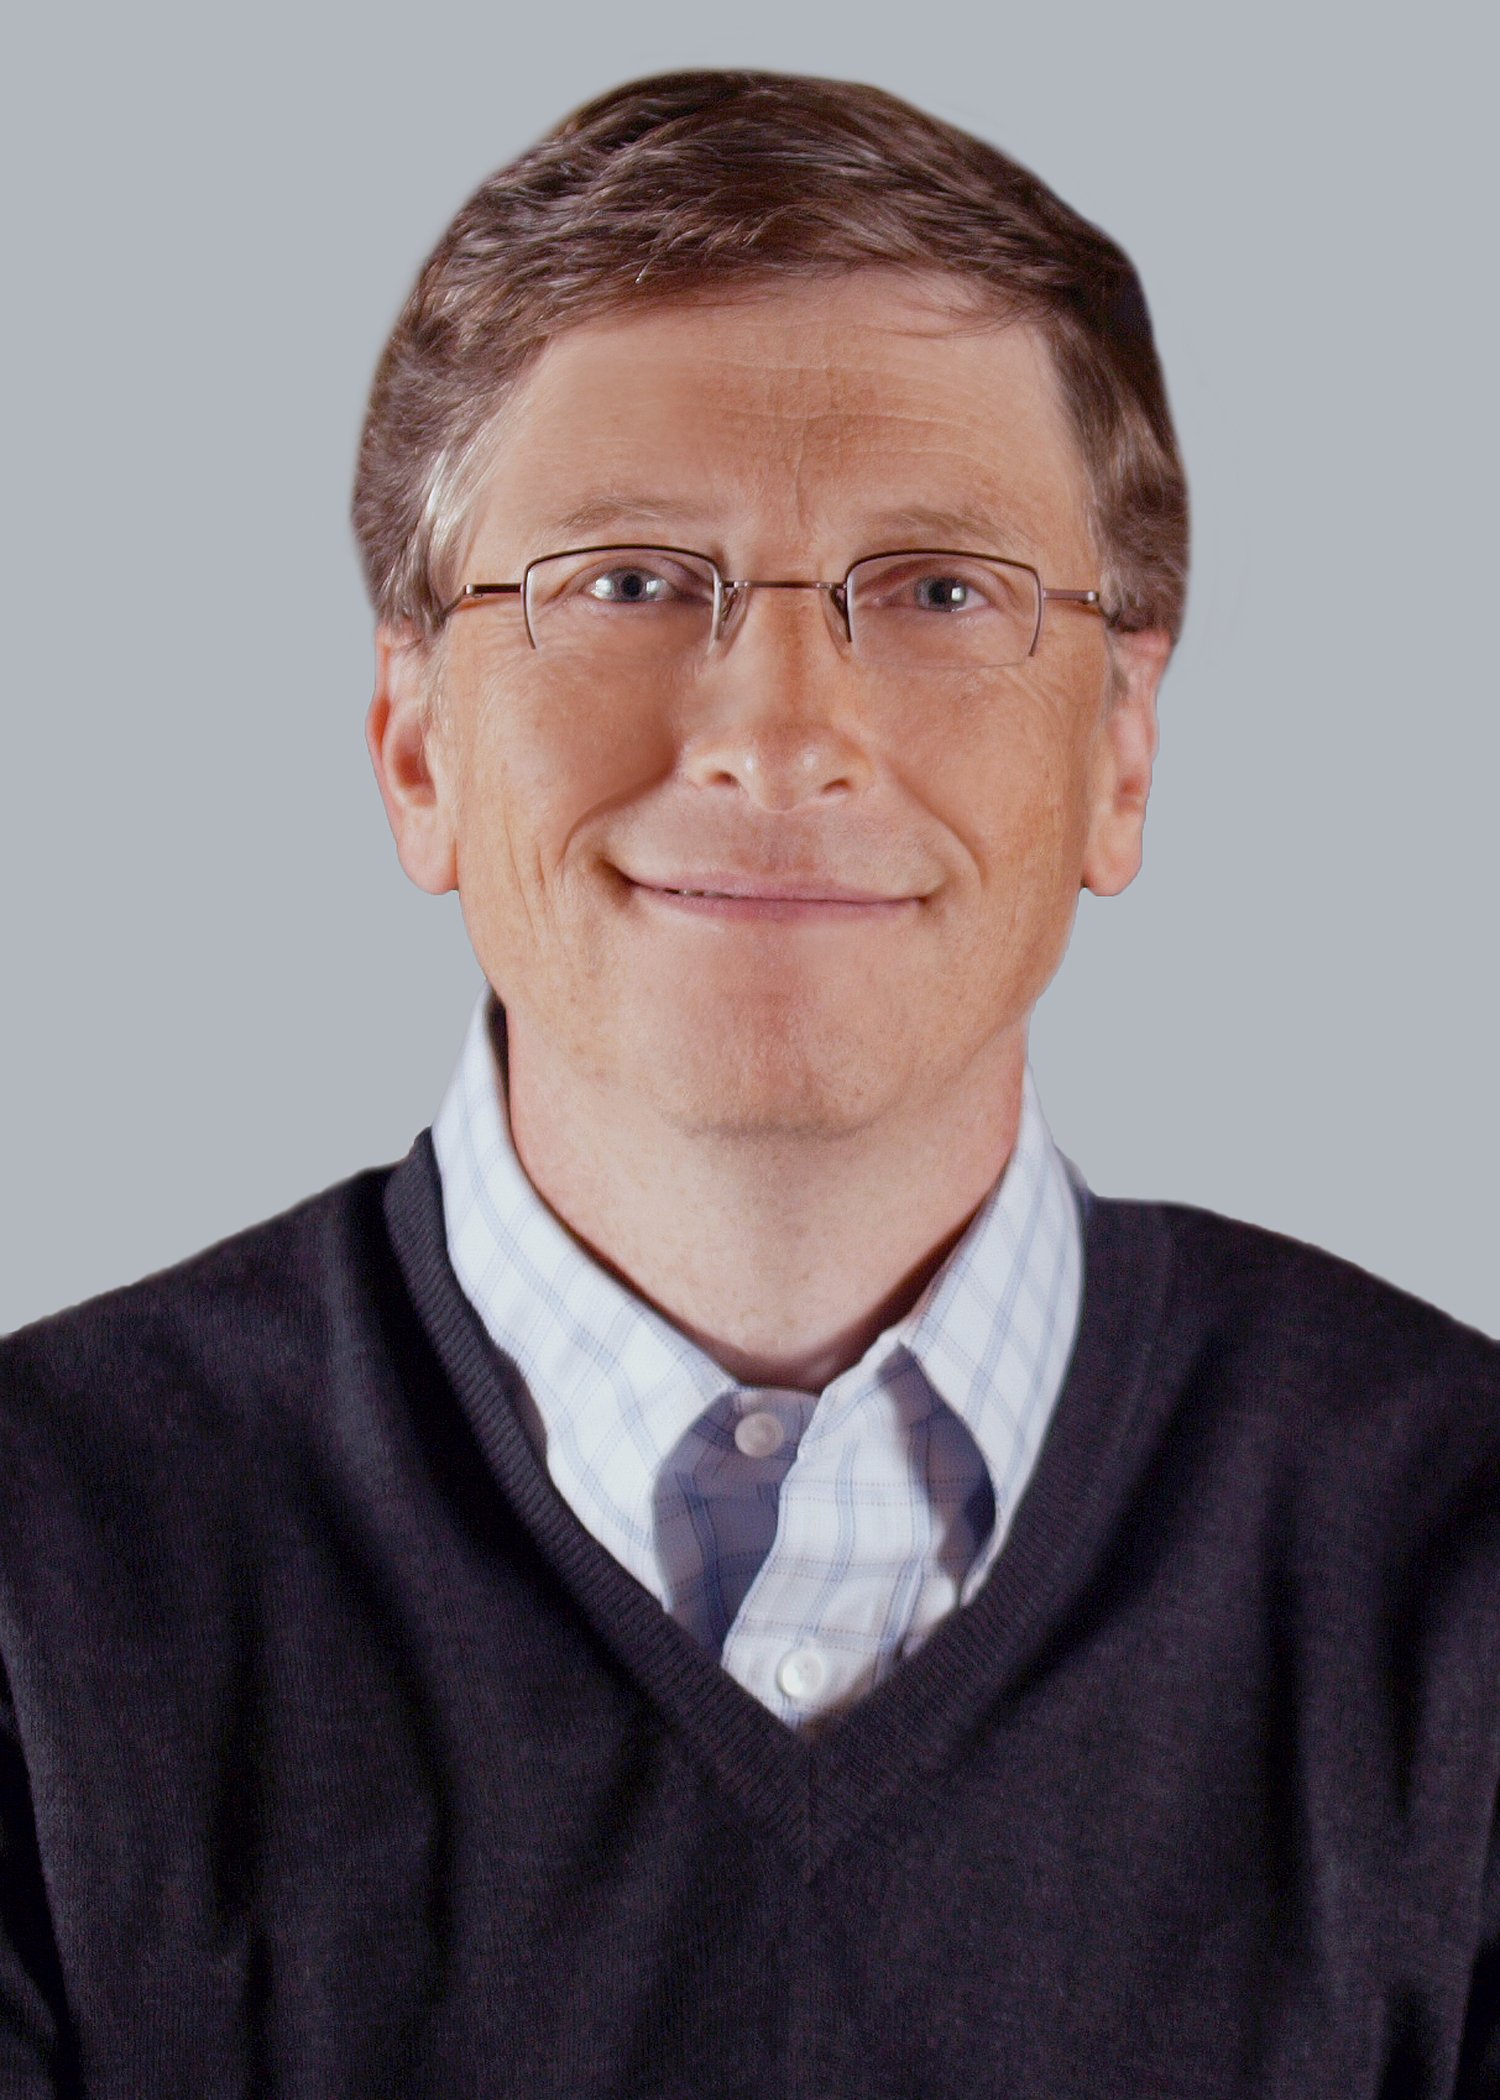 Bill Gates is the former Microsoft CEO and co-chair of the Bill and Melinda Gates Foundation.